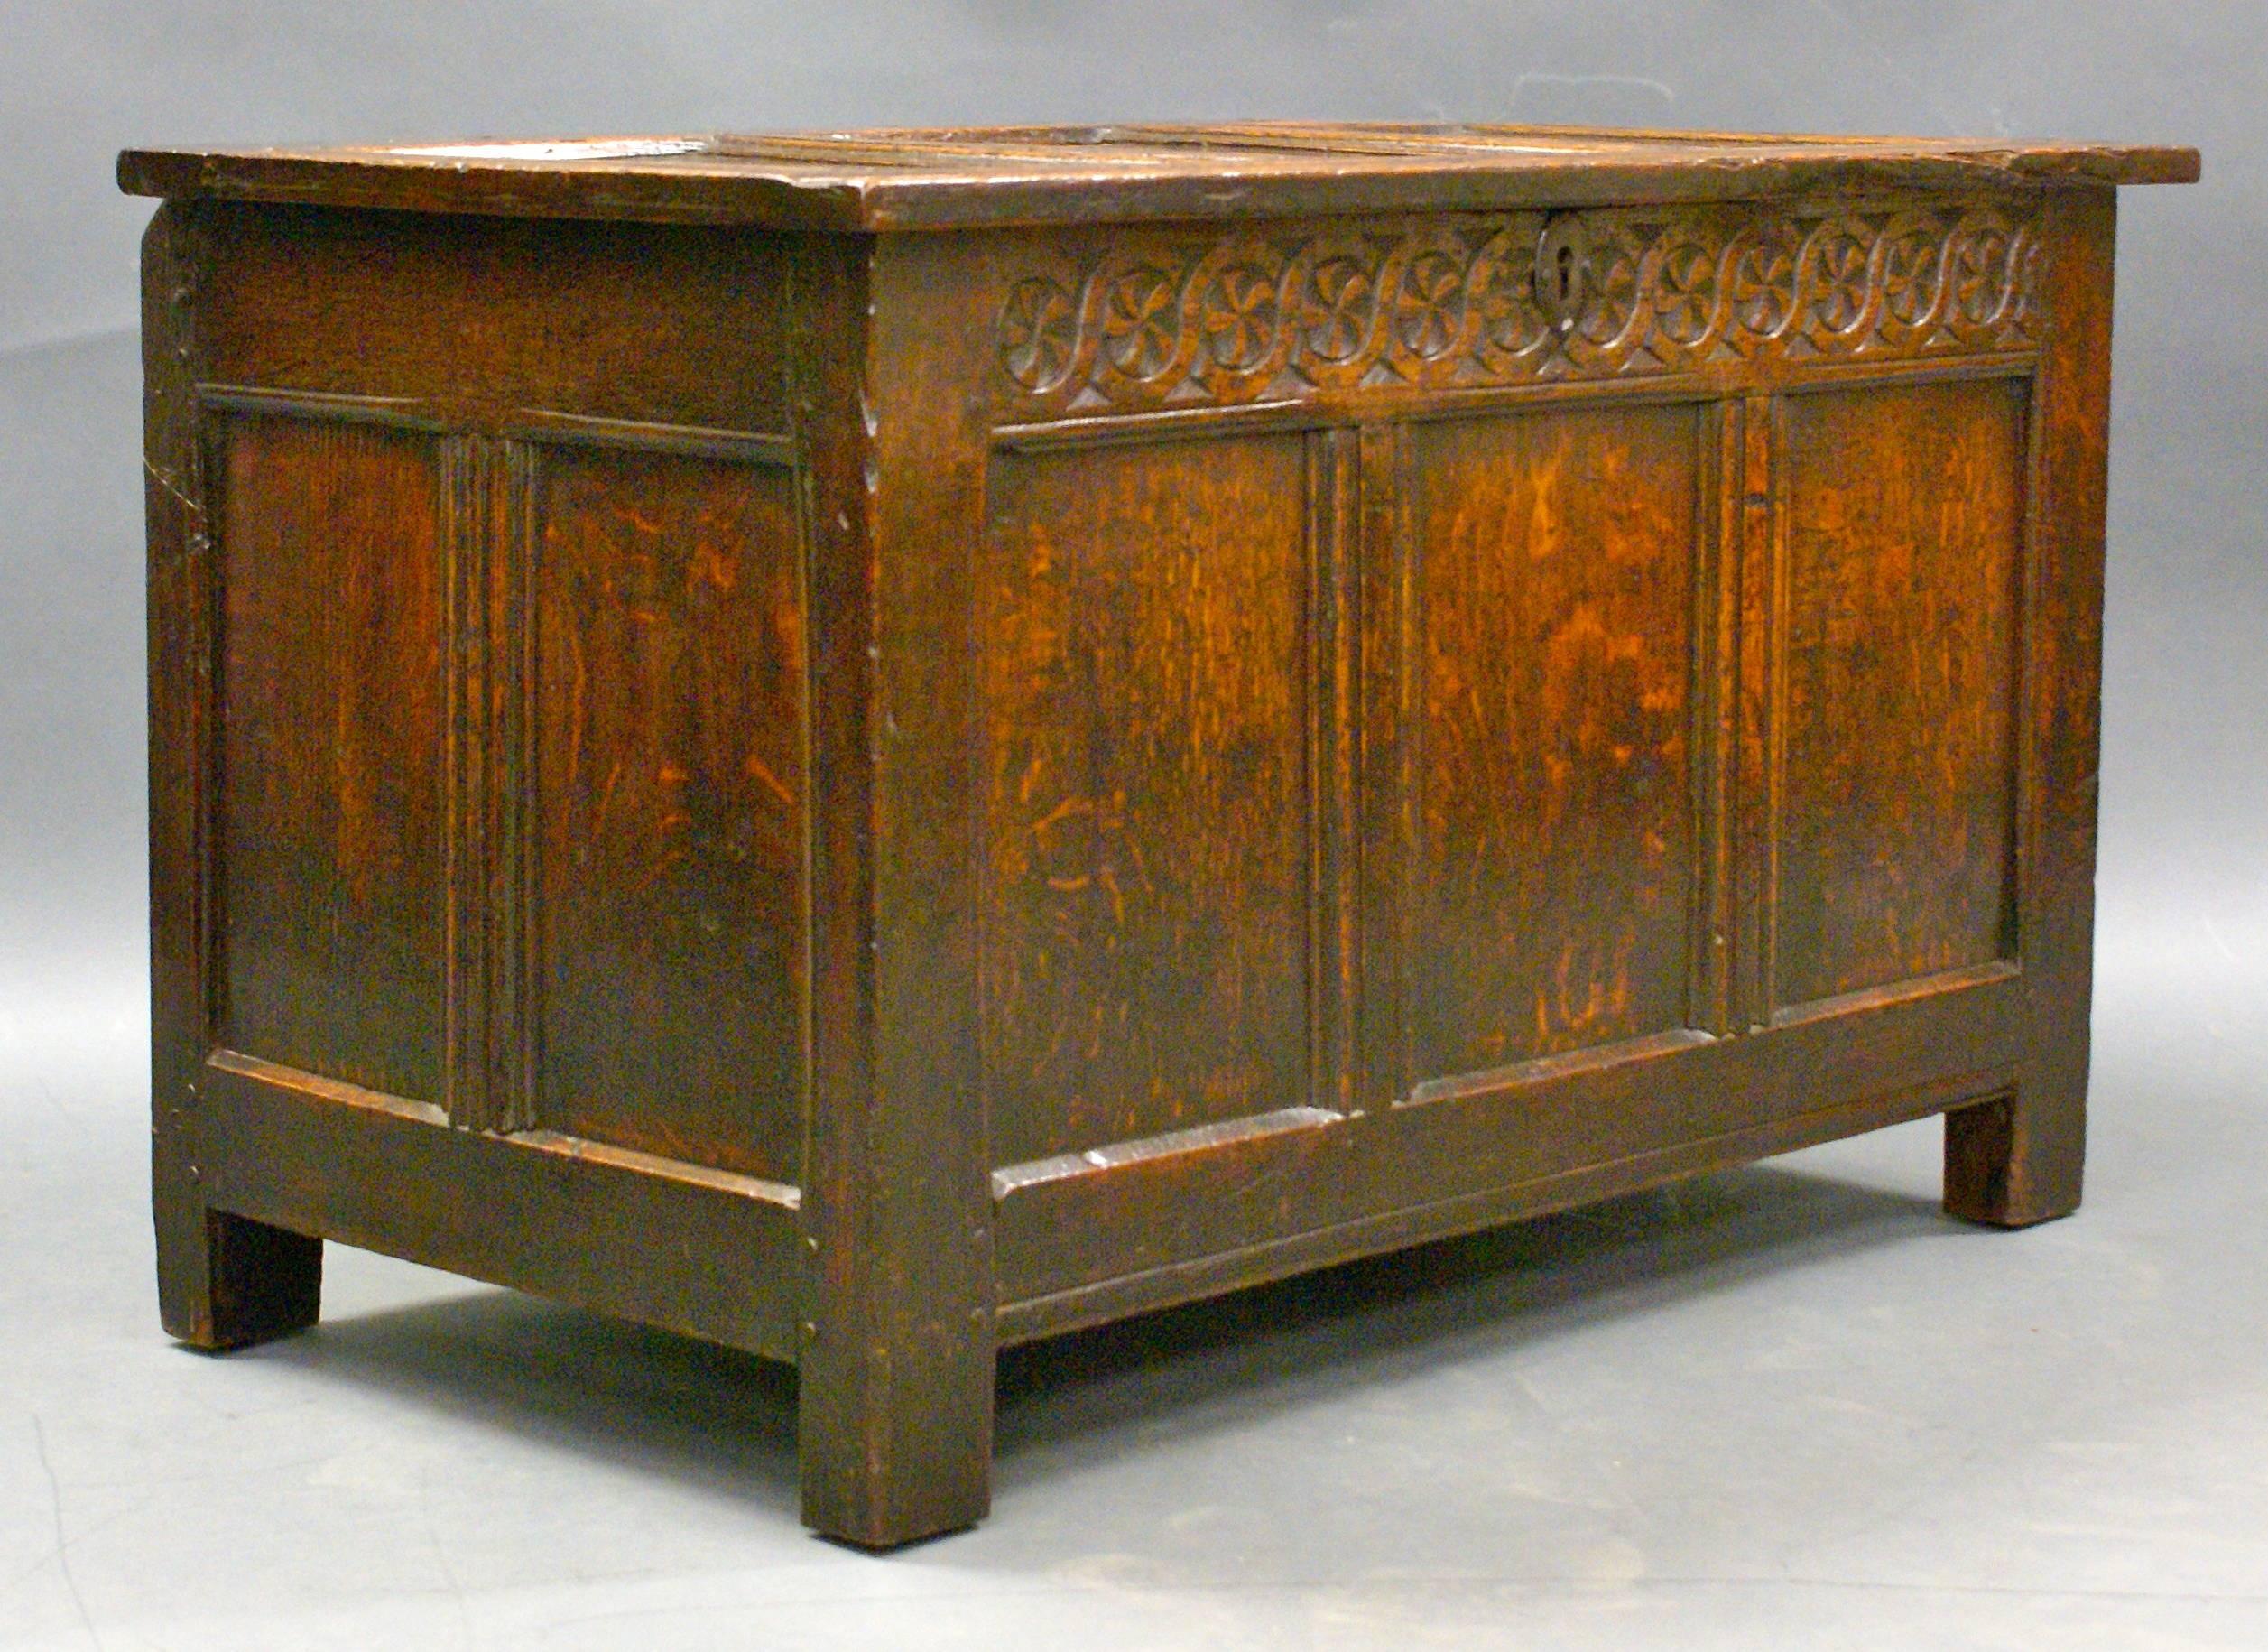 Of small proportions, the hinged lid with three panels, within a channel moulded framework, retains its original two iron butterfly hinges and opens to a lidded candle box to the right side. The front has a guilloche carved frieze. In very good and